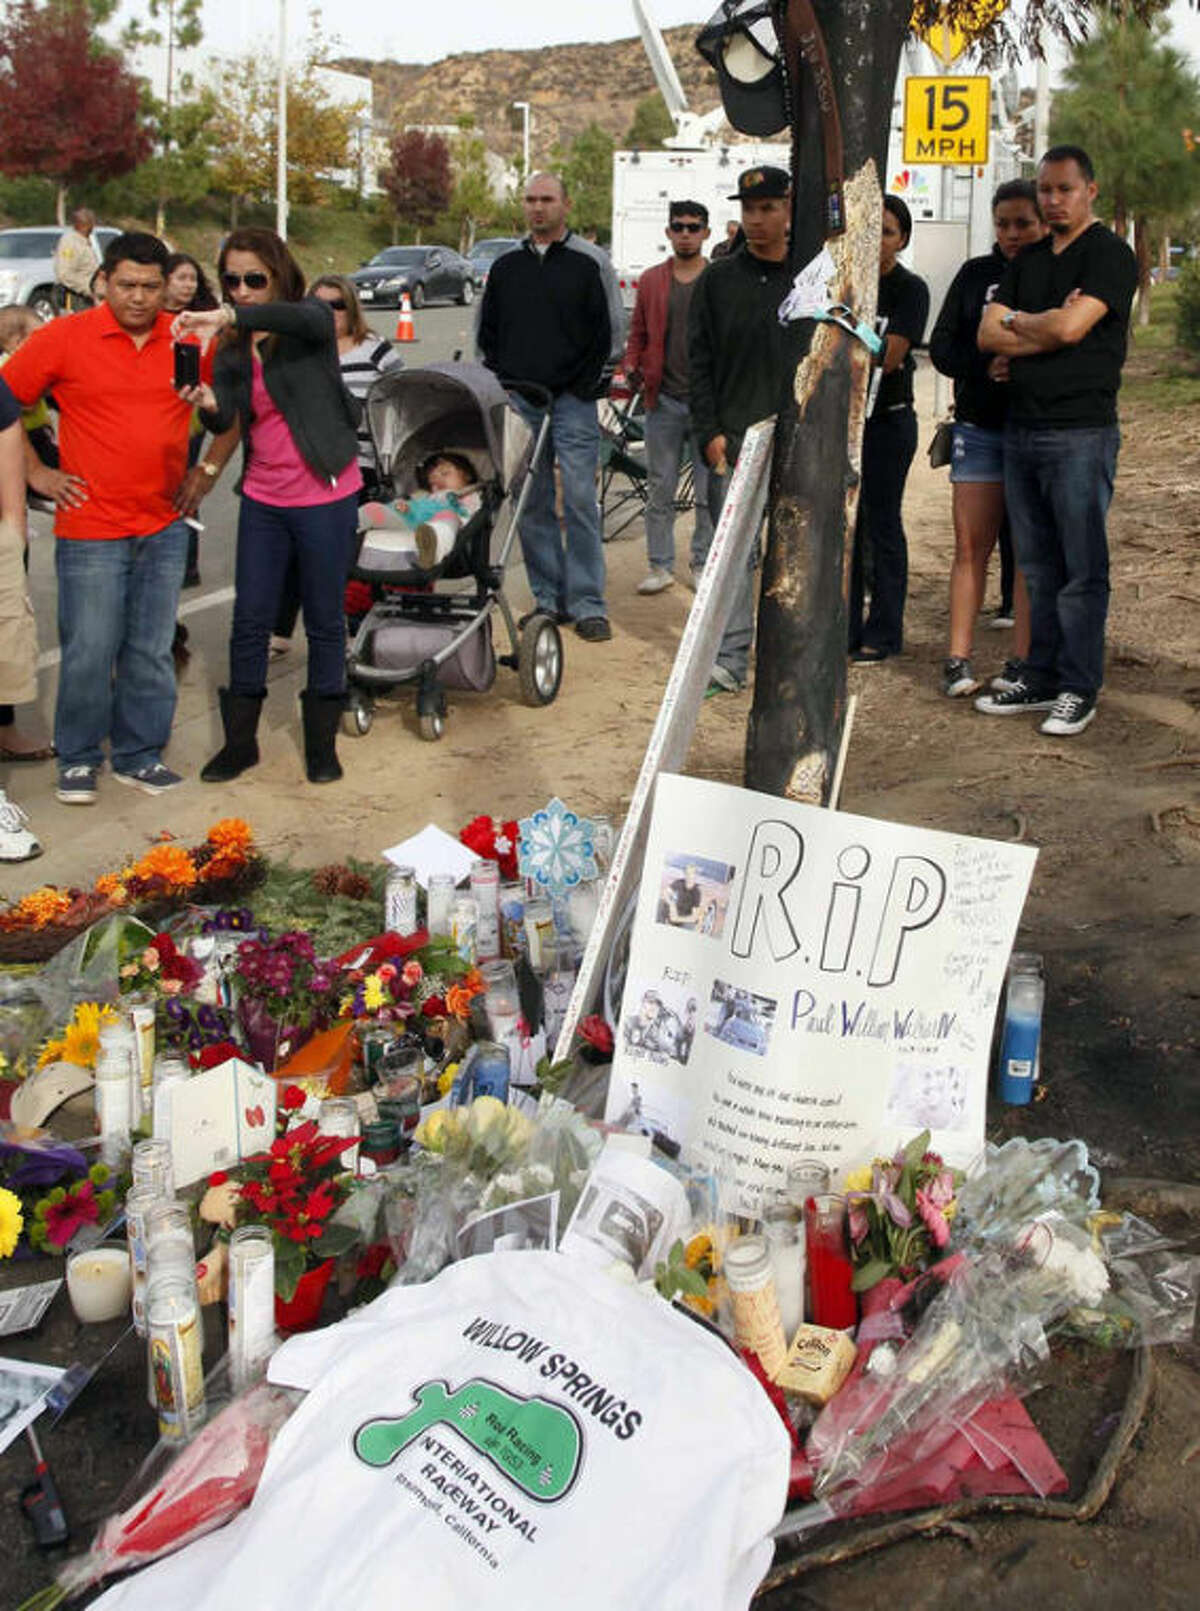 People view a roadside memorial at the site of the auto crash that took the life of actor Paul Walker and another man, in the small community of Valencia, Calif., Monday, Dec. 2, 2013. The neighborhood where "Fast & Furious" star Walker died in the one-car crash is known to attract street racers, according to law enforcement officials. Walker and his friend and fellow fast-car enthusiast Roger Rodas died Saturday when the 2005 Porsche Carrera GT they were traveling in smashed into a light pole and tree. The two had taken what was expected to be a brief drive away from a charity fundraiser at Rodas' custom car shop in Valencia, about 30 miles (48 kilometers) northwest of Los Angeles. (AP Photo/Nick Ut)